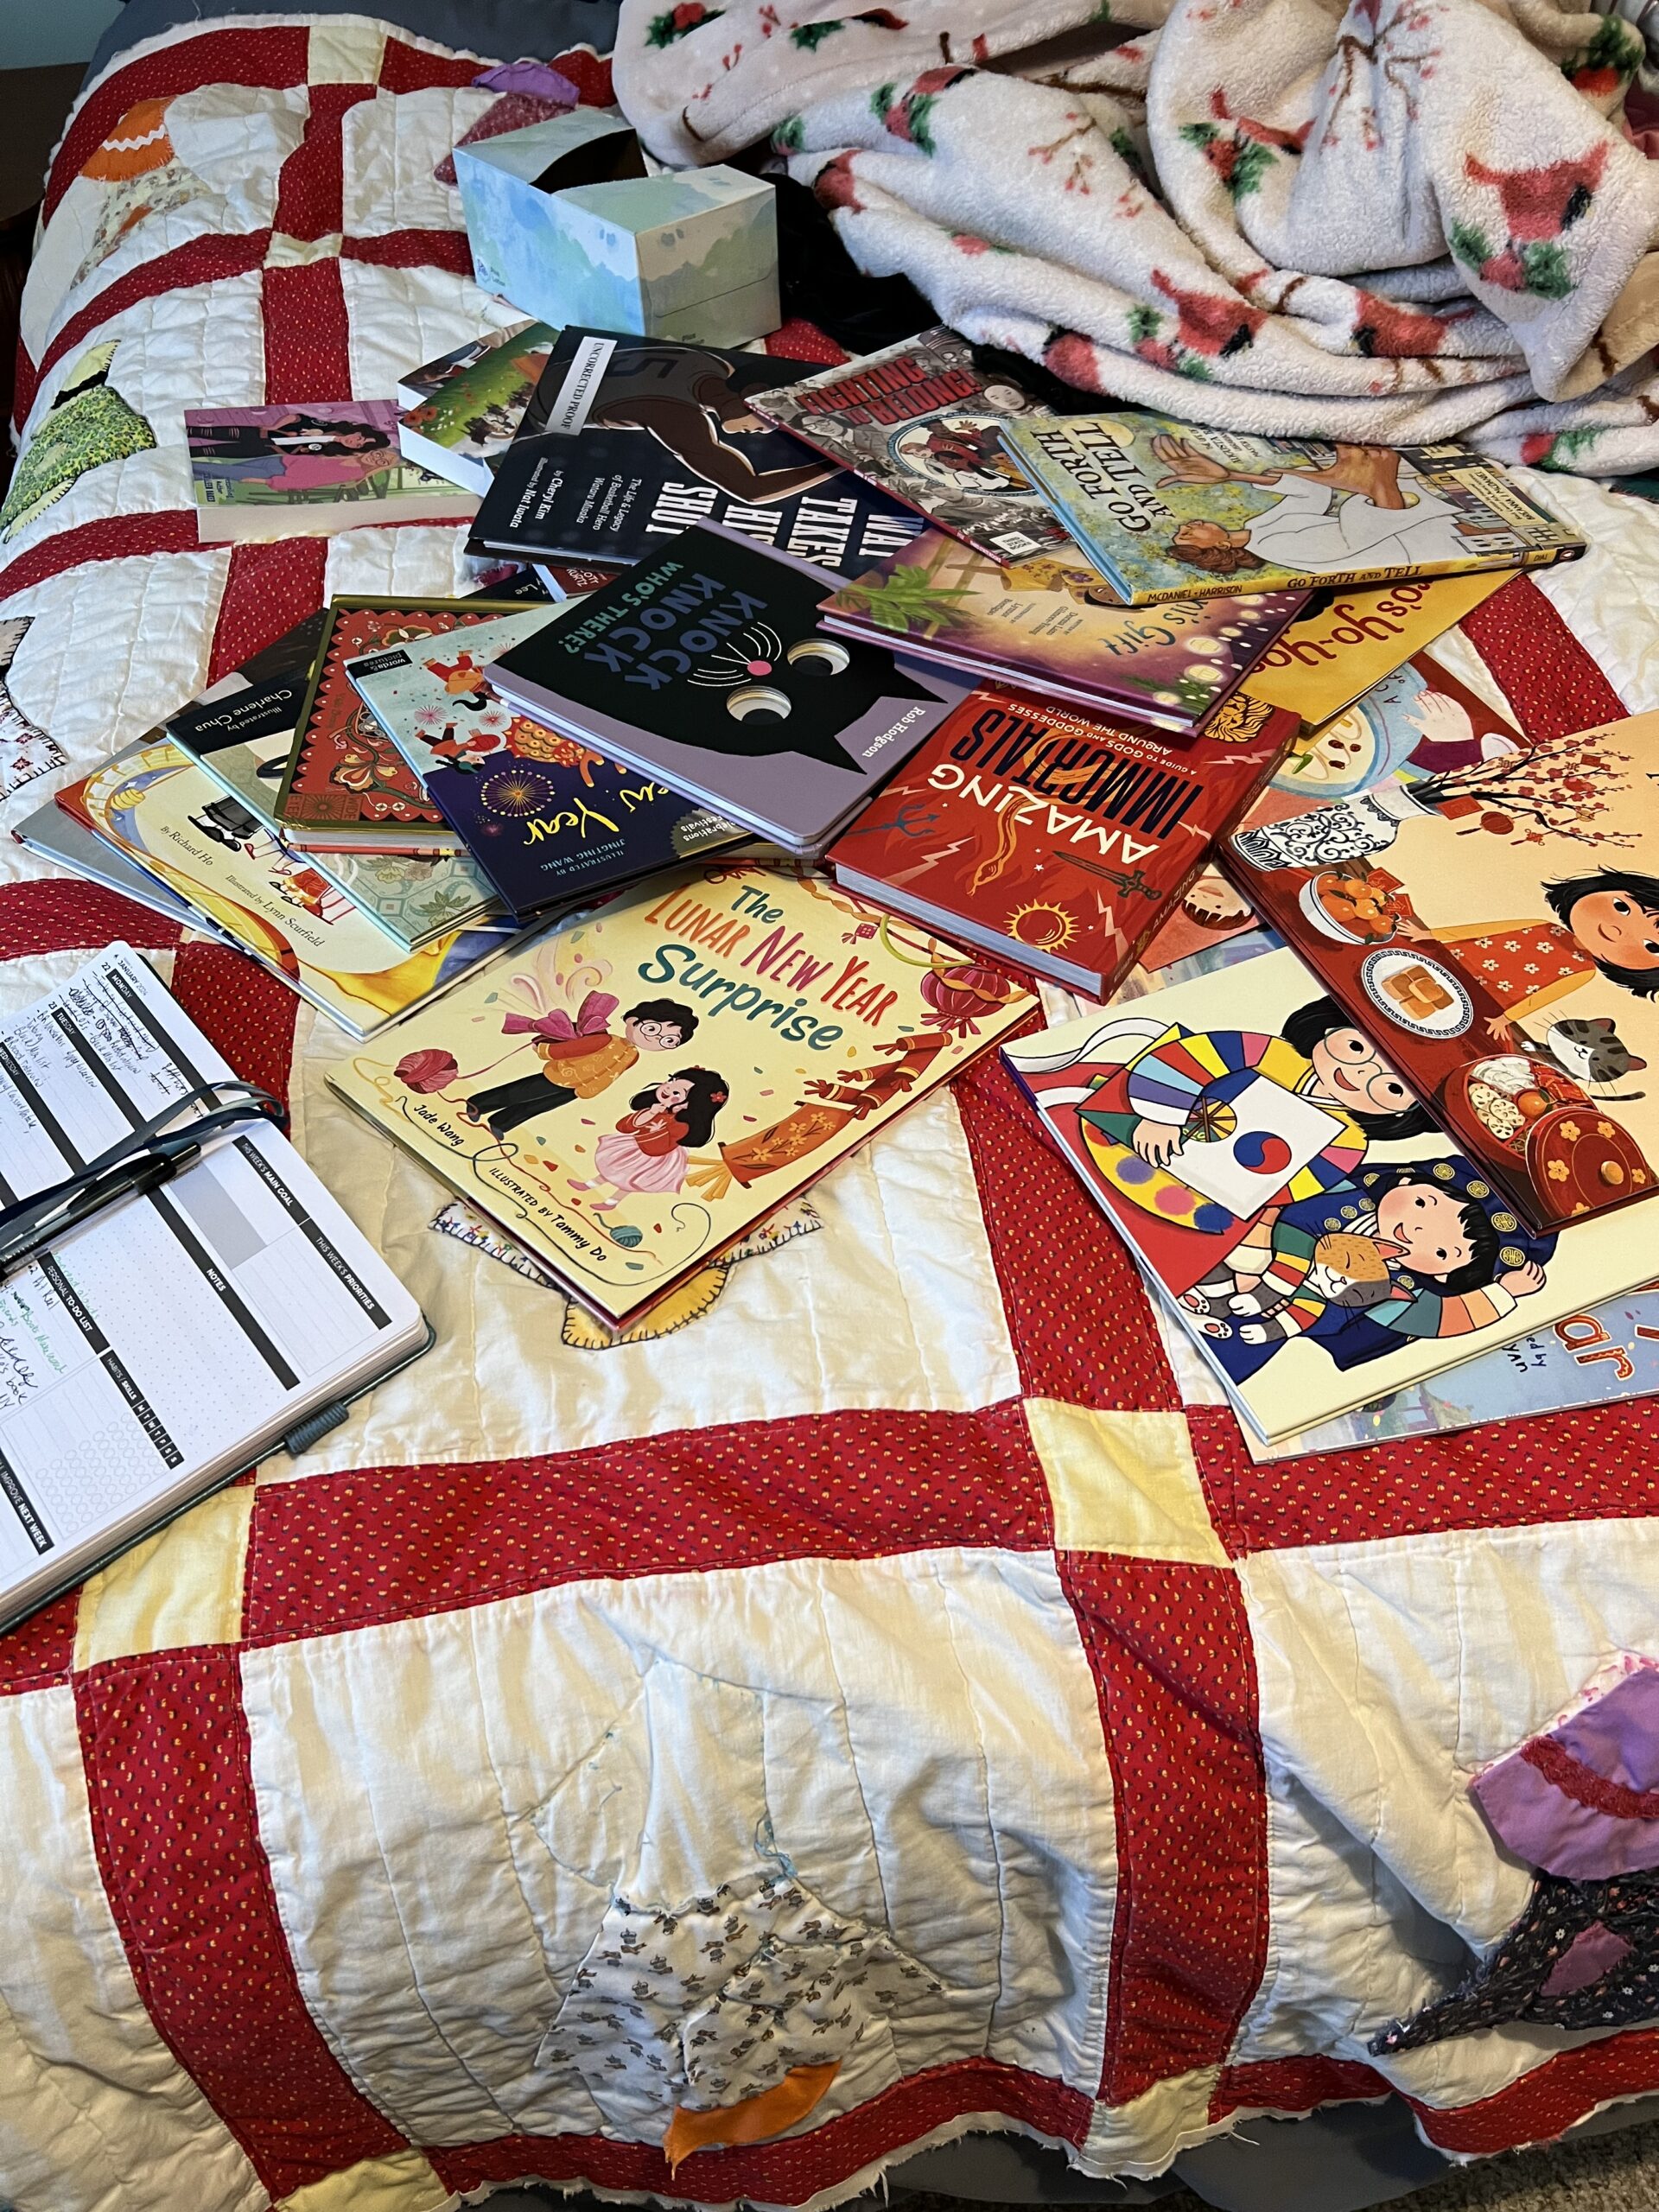 a photo of picture books spread out across a bed